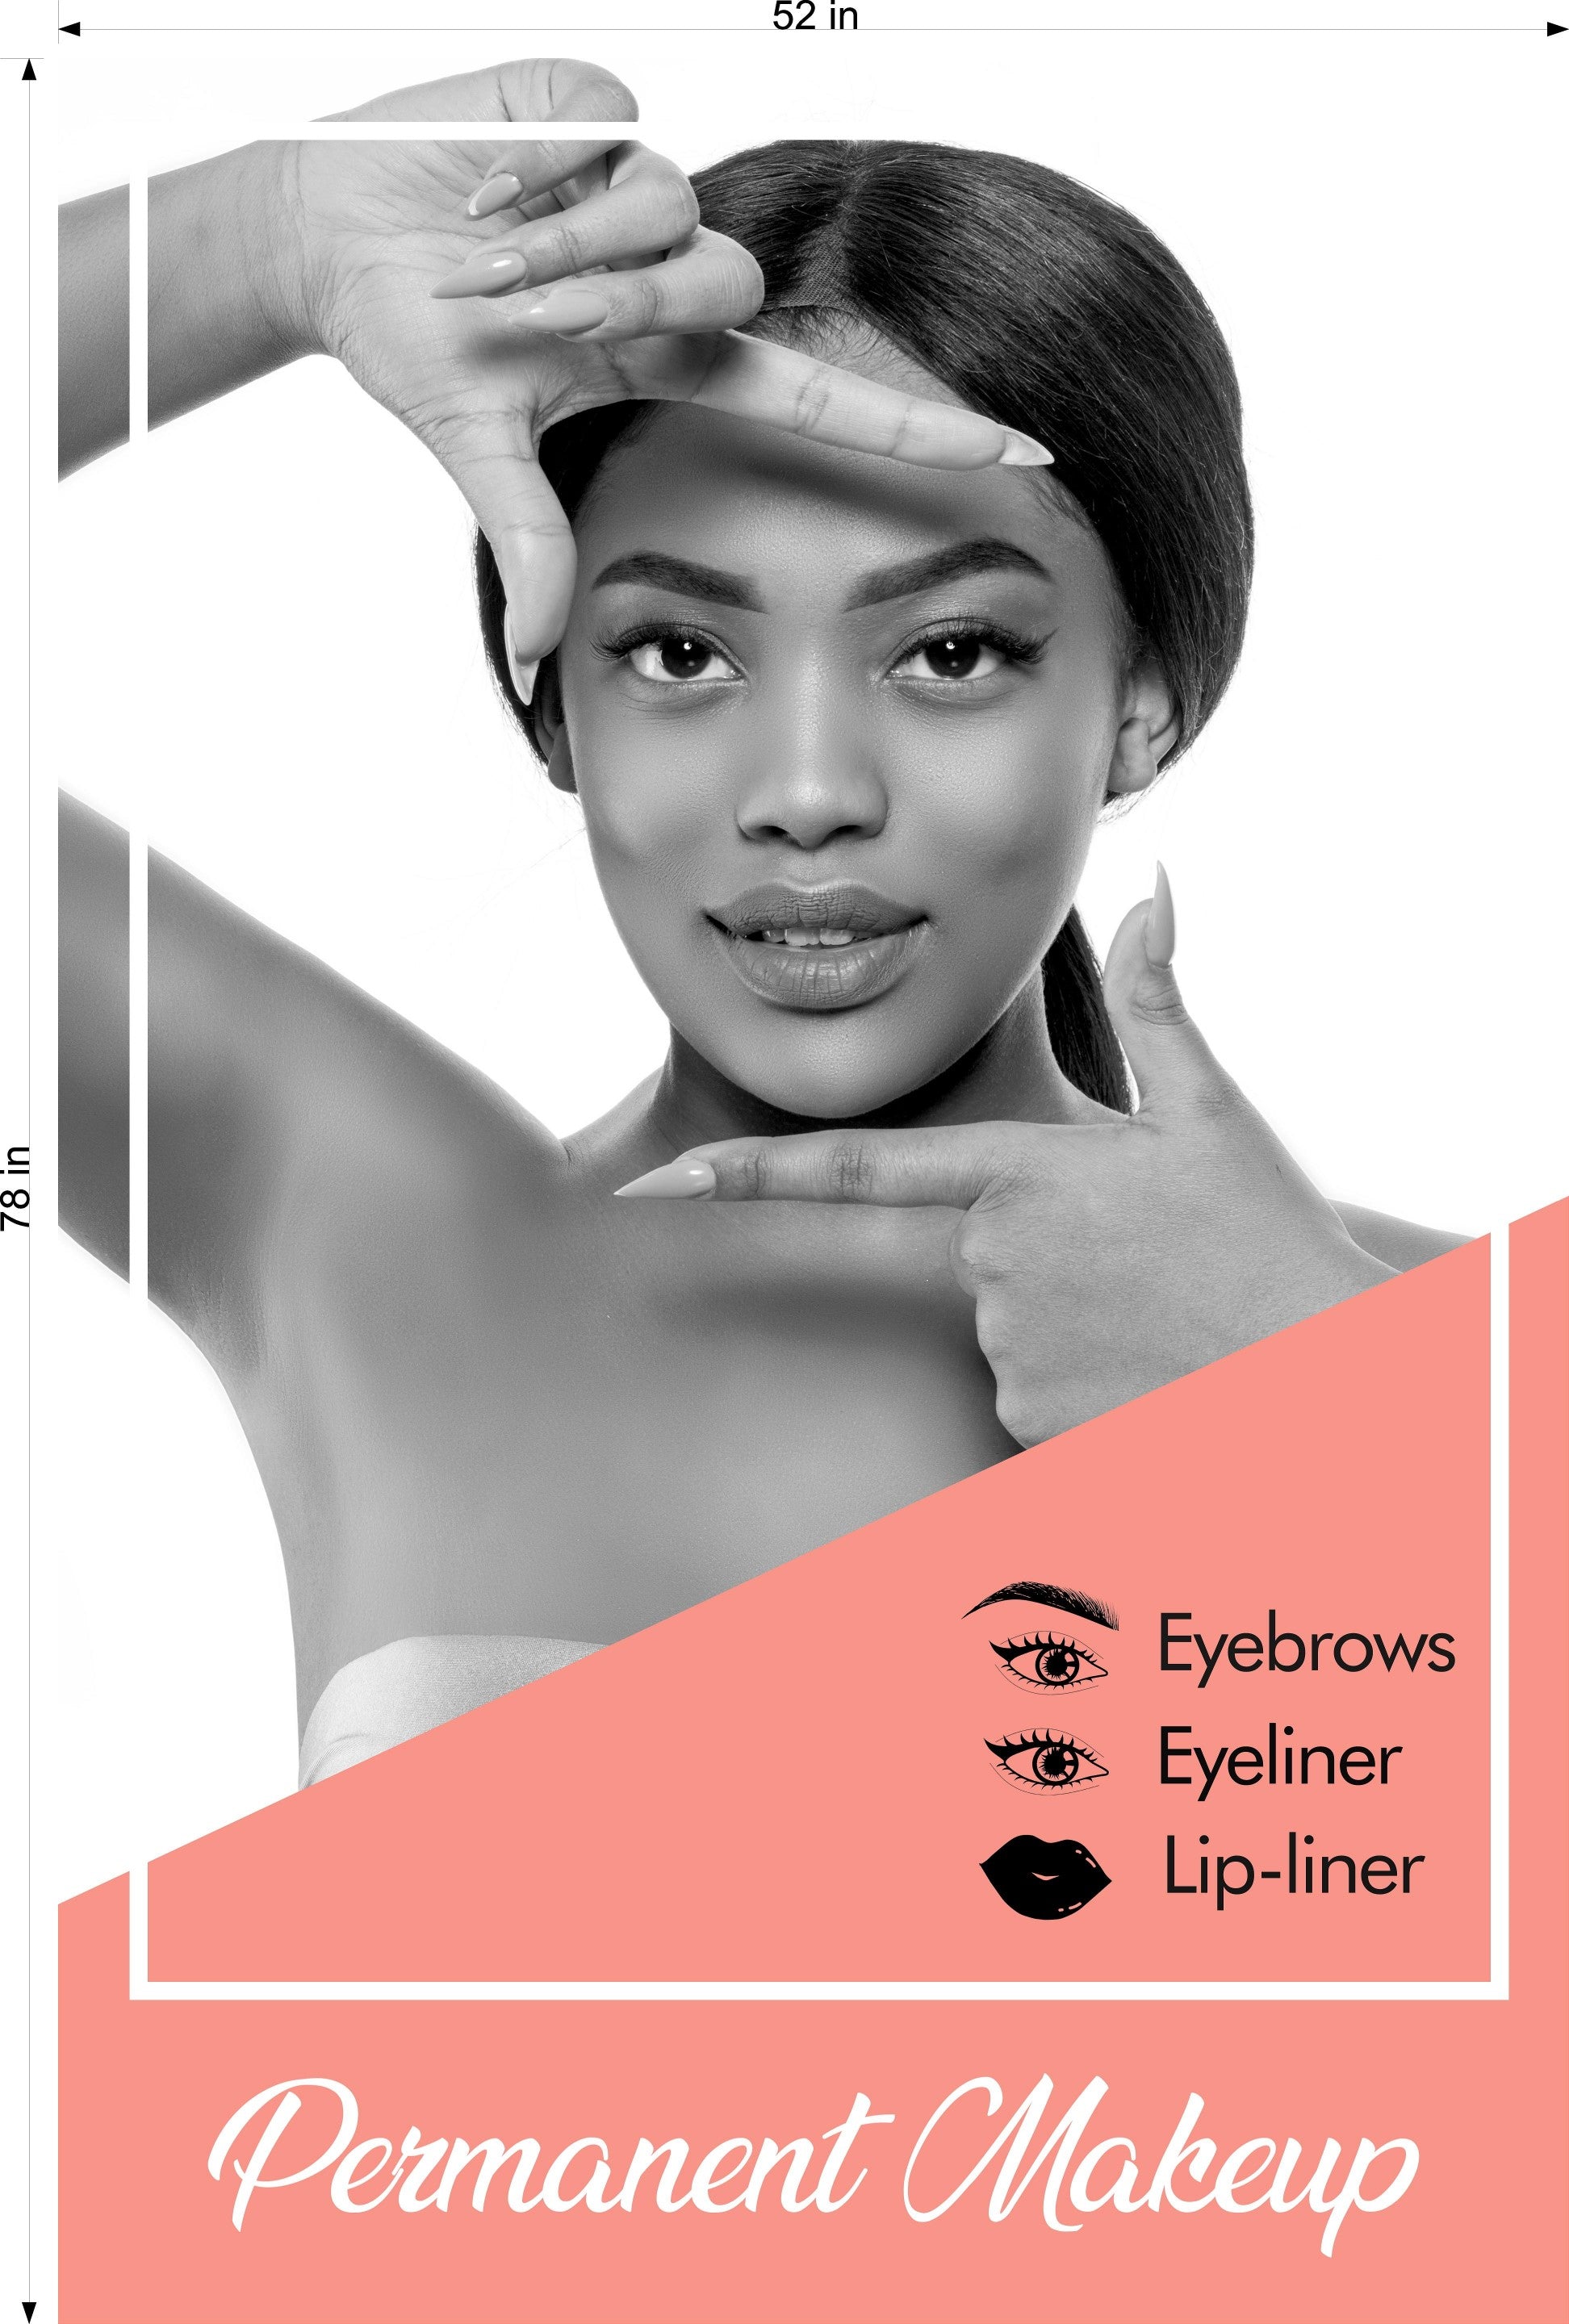 Permanent 45 Perforated Mesh One Way Vision See-Through Window Vinyl Eyebrows Makeup Sign Microblading Vertical